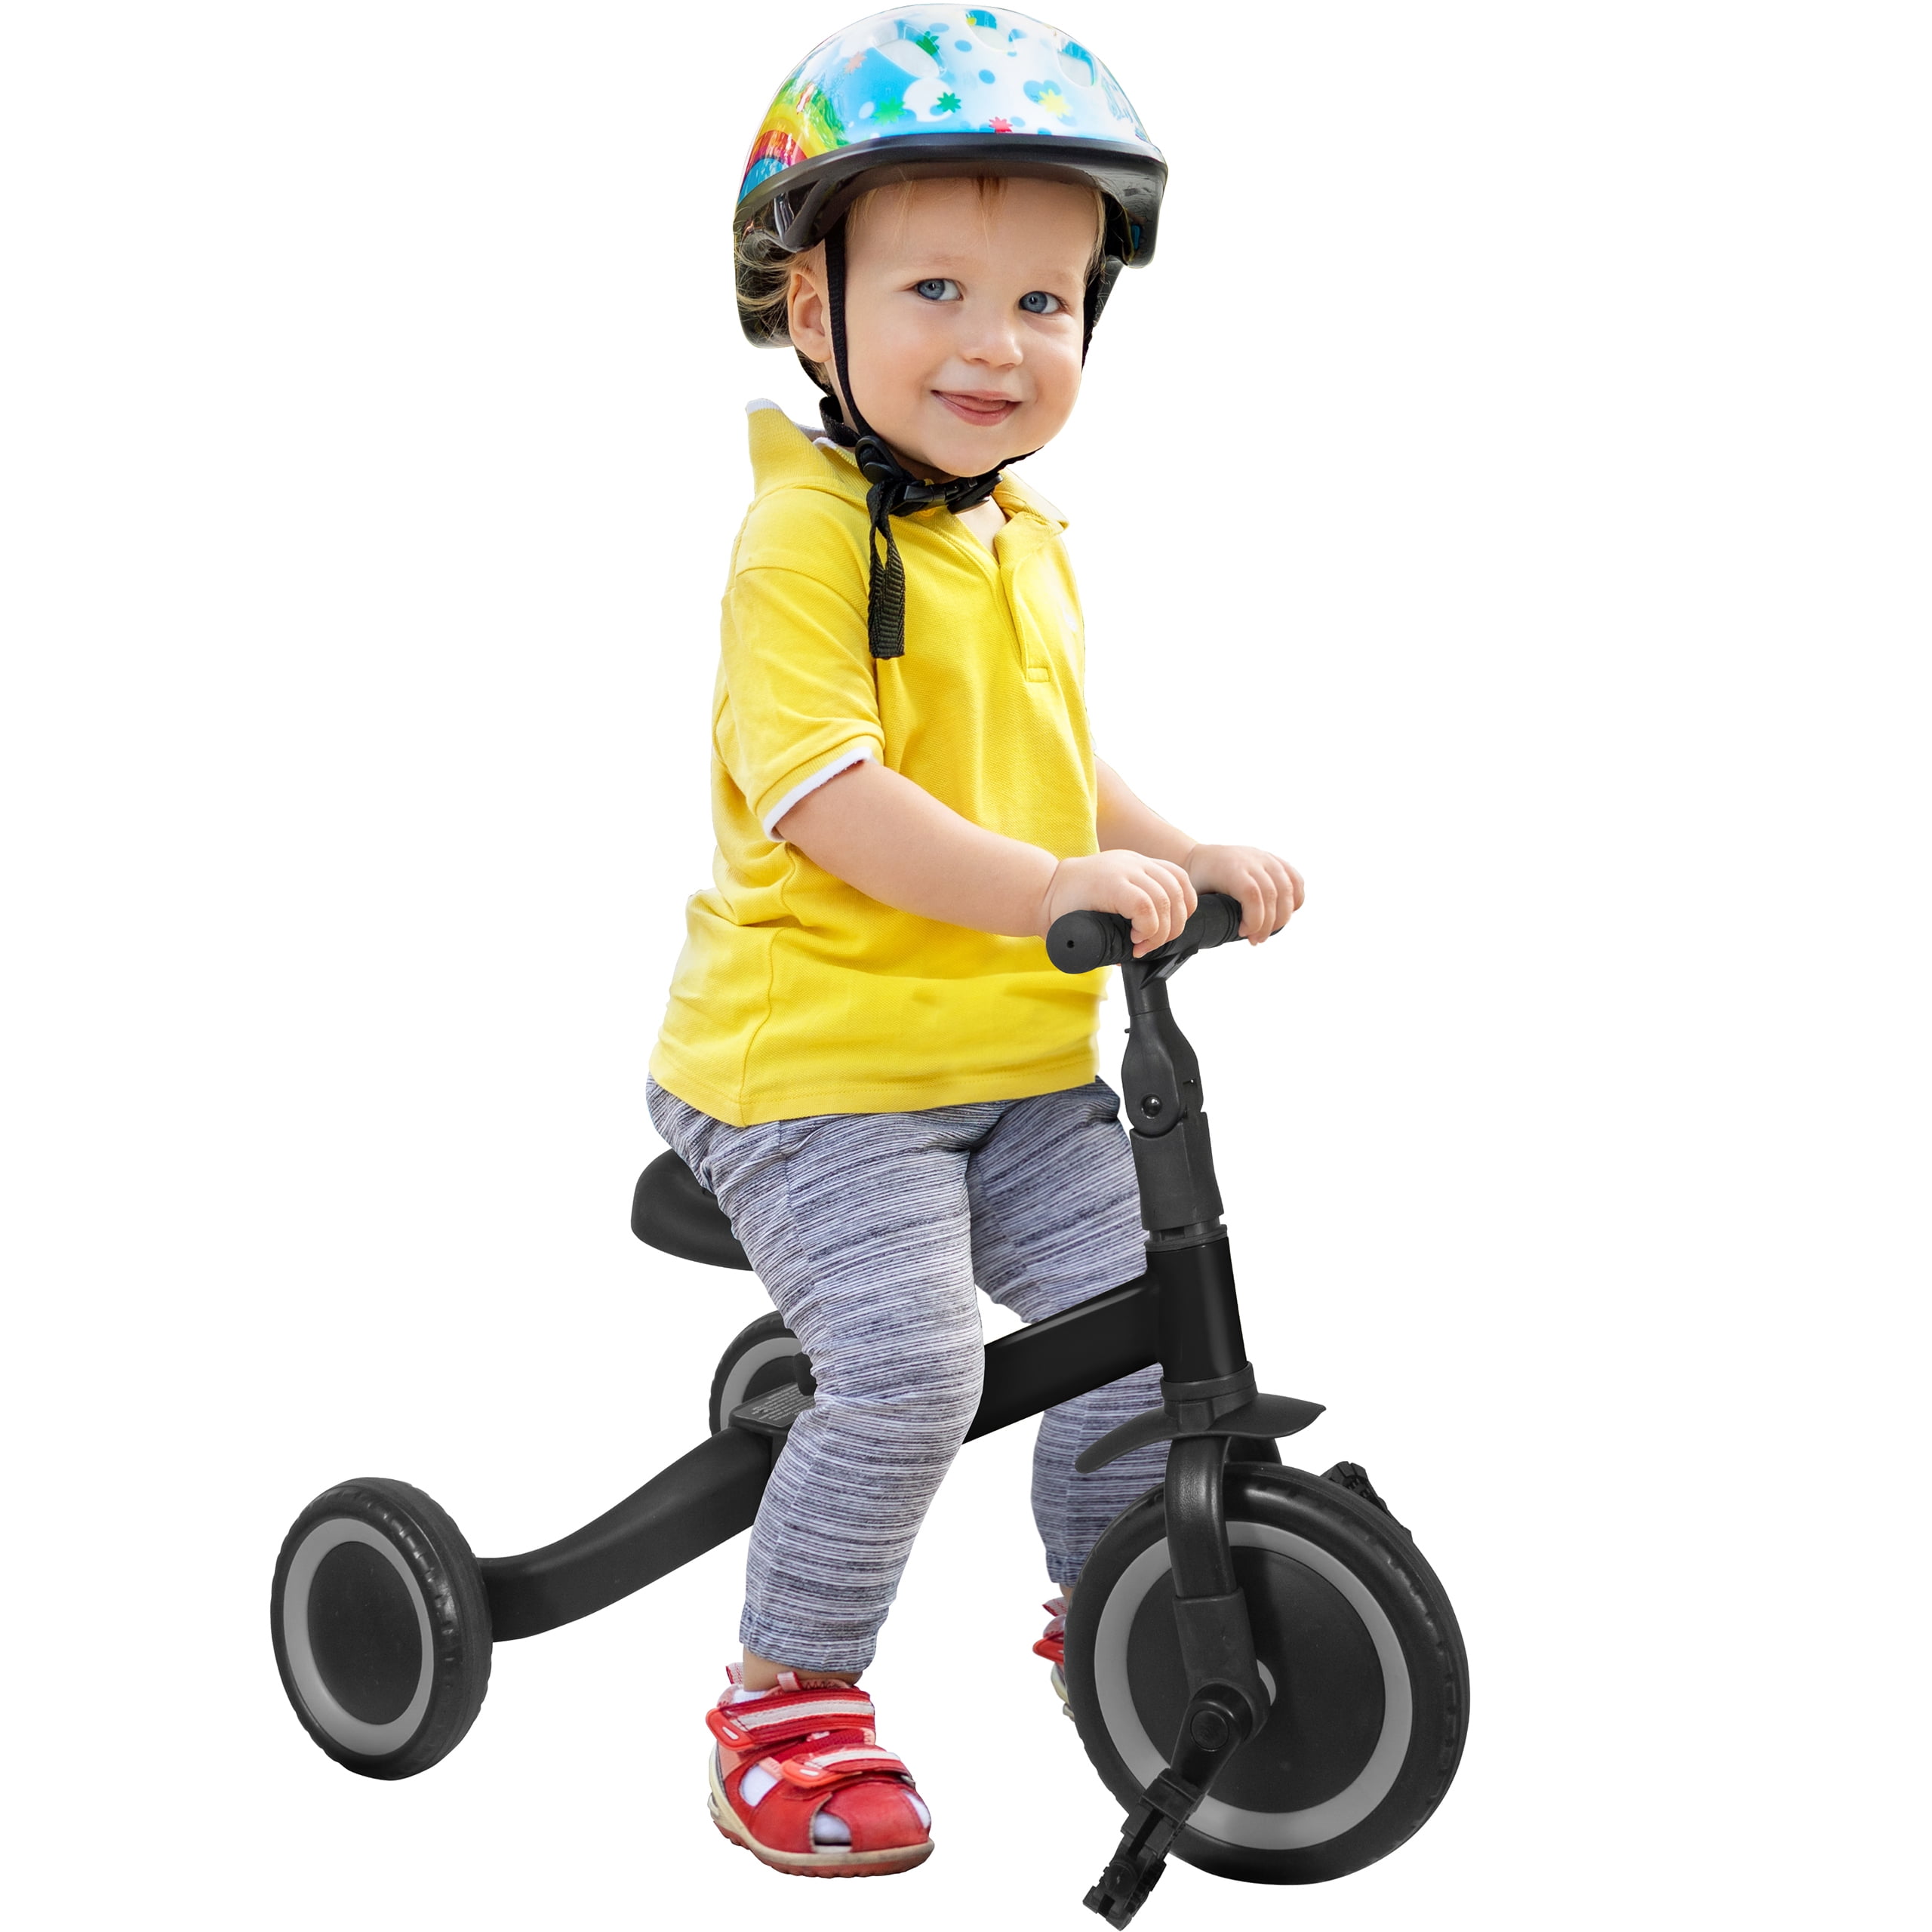 Baby Balance Bikes Cute Toddler Riding Toys 2 Gear Adjustment Seat Kids' Bicycles Outdoor Indoor Walker 3 Wheels Training Bike for 2-4 Years Old Boys Girls First Birthday Gifts 